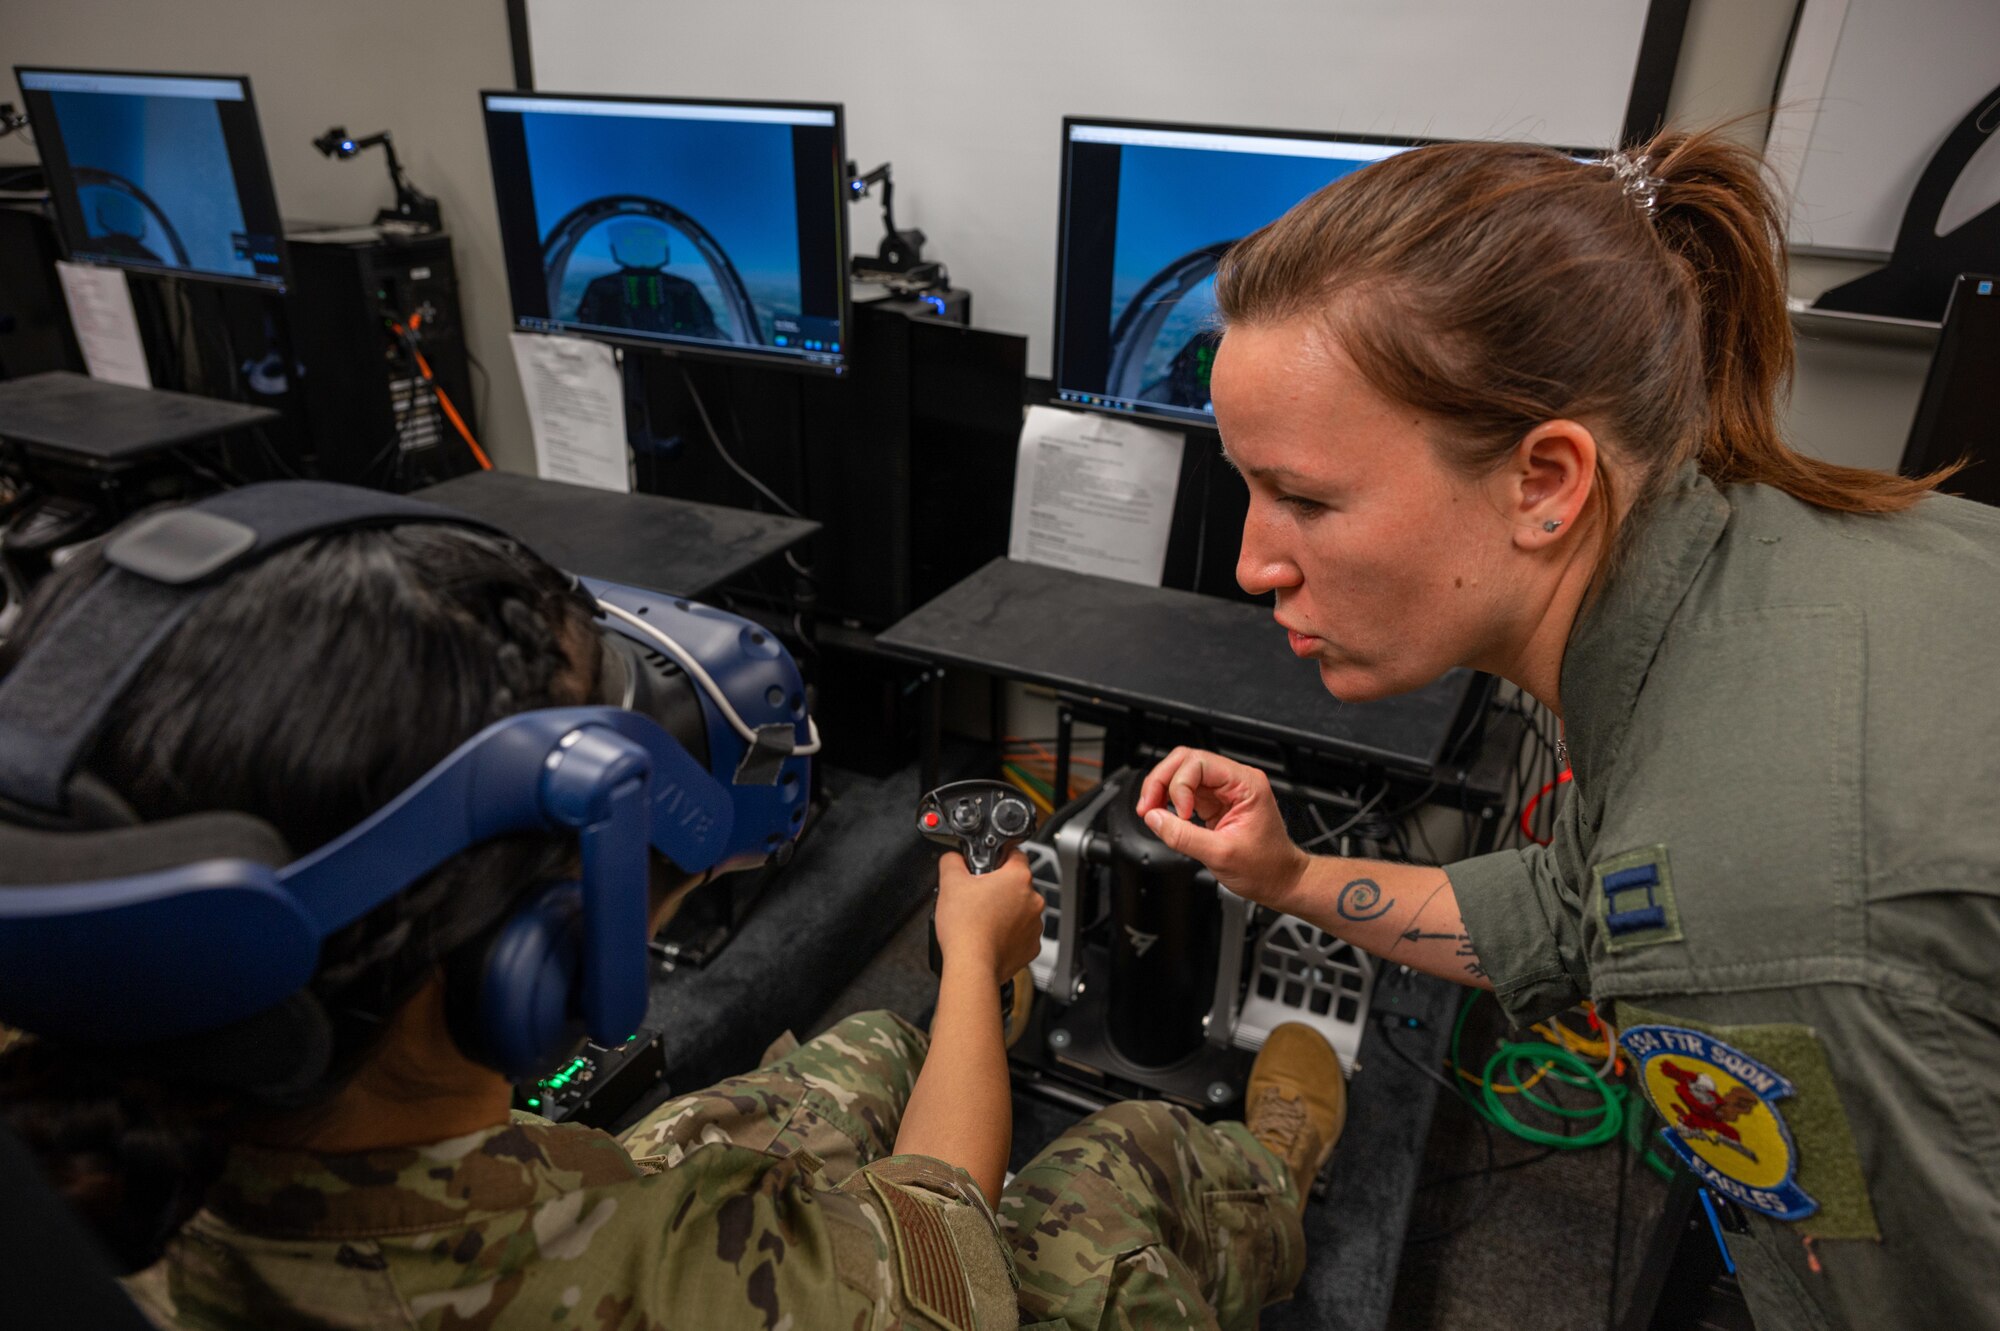 U.S Air Force Capt. Victoria Beck, 334th Fighter Squadron weapons safety officer, shows Air Force ROTC Academy Cadet Angelica Lumactod how to properly fly an F-15E Strike Eagle in a virtual reality training simulation at Seymour Johnson Air Force Base, North Carolina, August 3, 2023. Under the guidance of Capt. Victoria Beck, 334th Fighter Squadron weapons safety officer and Capt. Cecilia “Feisty” Tuma, a pilot assigned to the 333rd Fighter Squadron, the cadets attempted to take-off, attack both airborne and land targets and land during the simulation. (U.S. Air Force photo by Airman 1st Class Leighton Lucero)